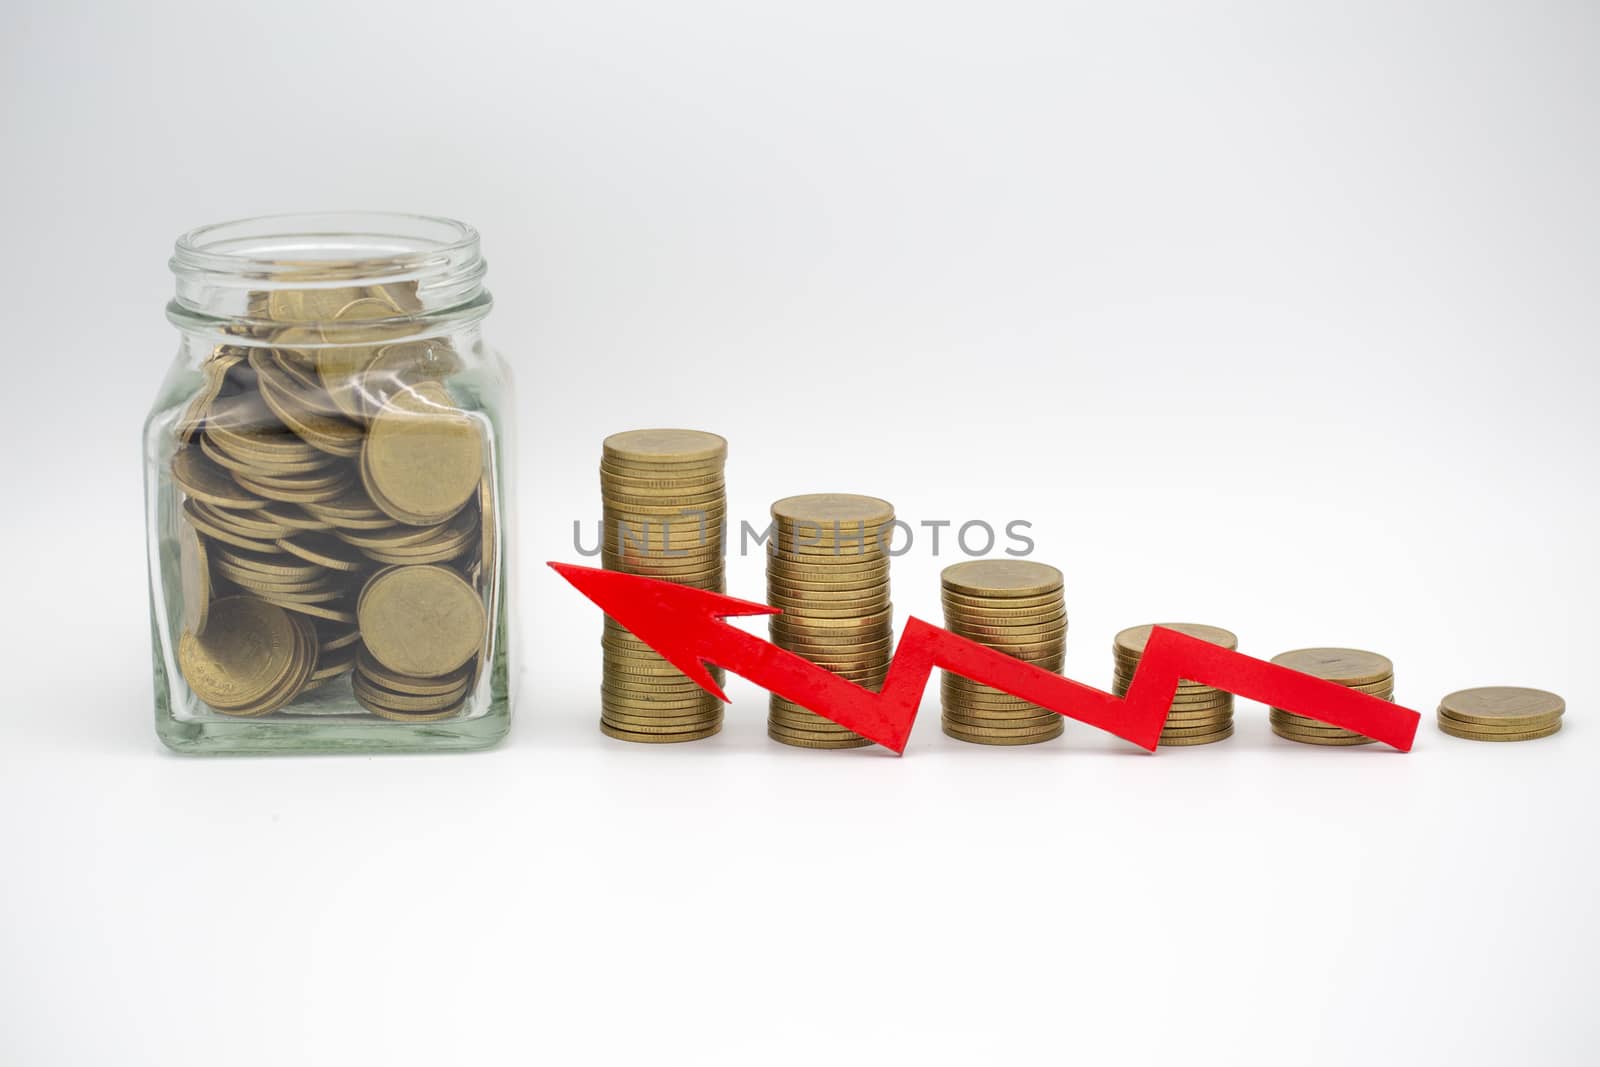 A coin in a glass bottle Ladder of coins. White background. The red arrow placed in front of the coin, the more economic ideas for high profits for investment businesses and monetary funds represents.